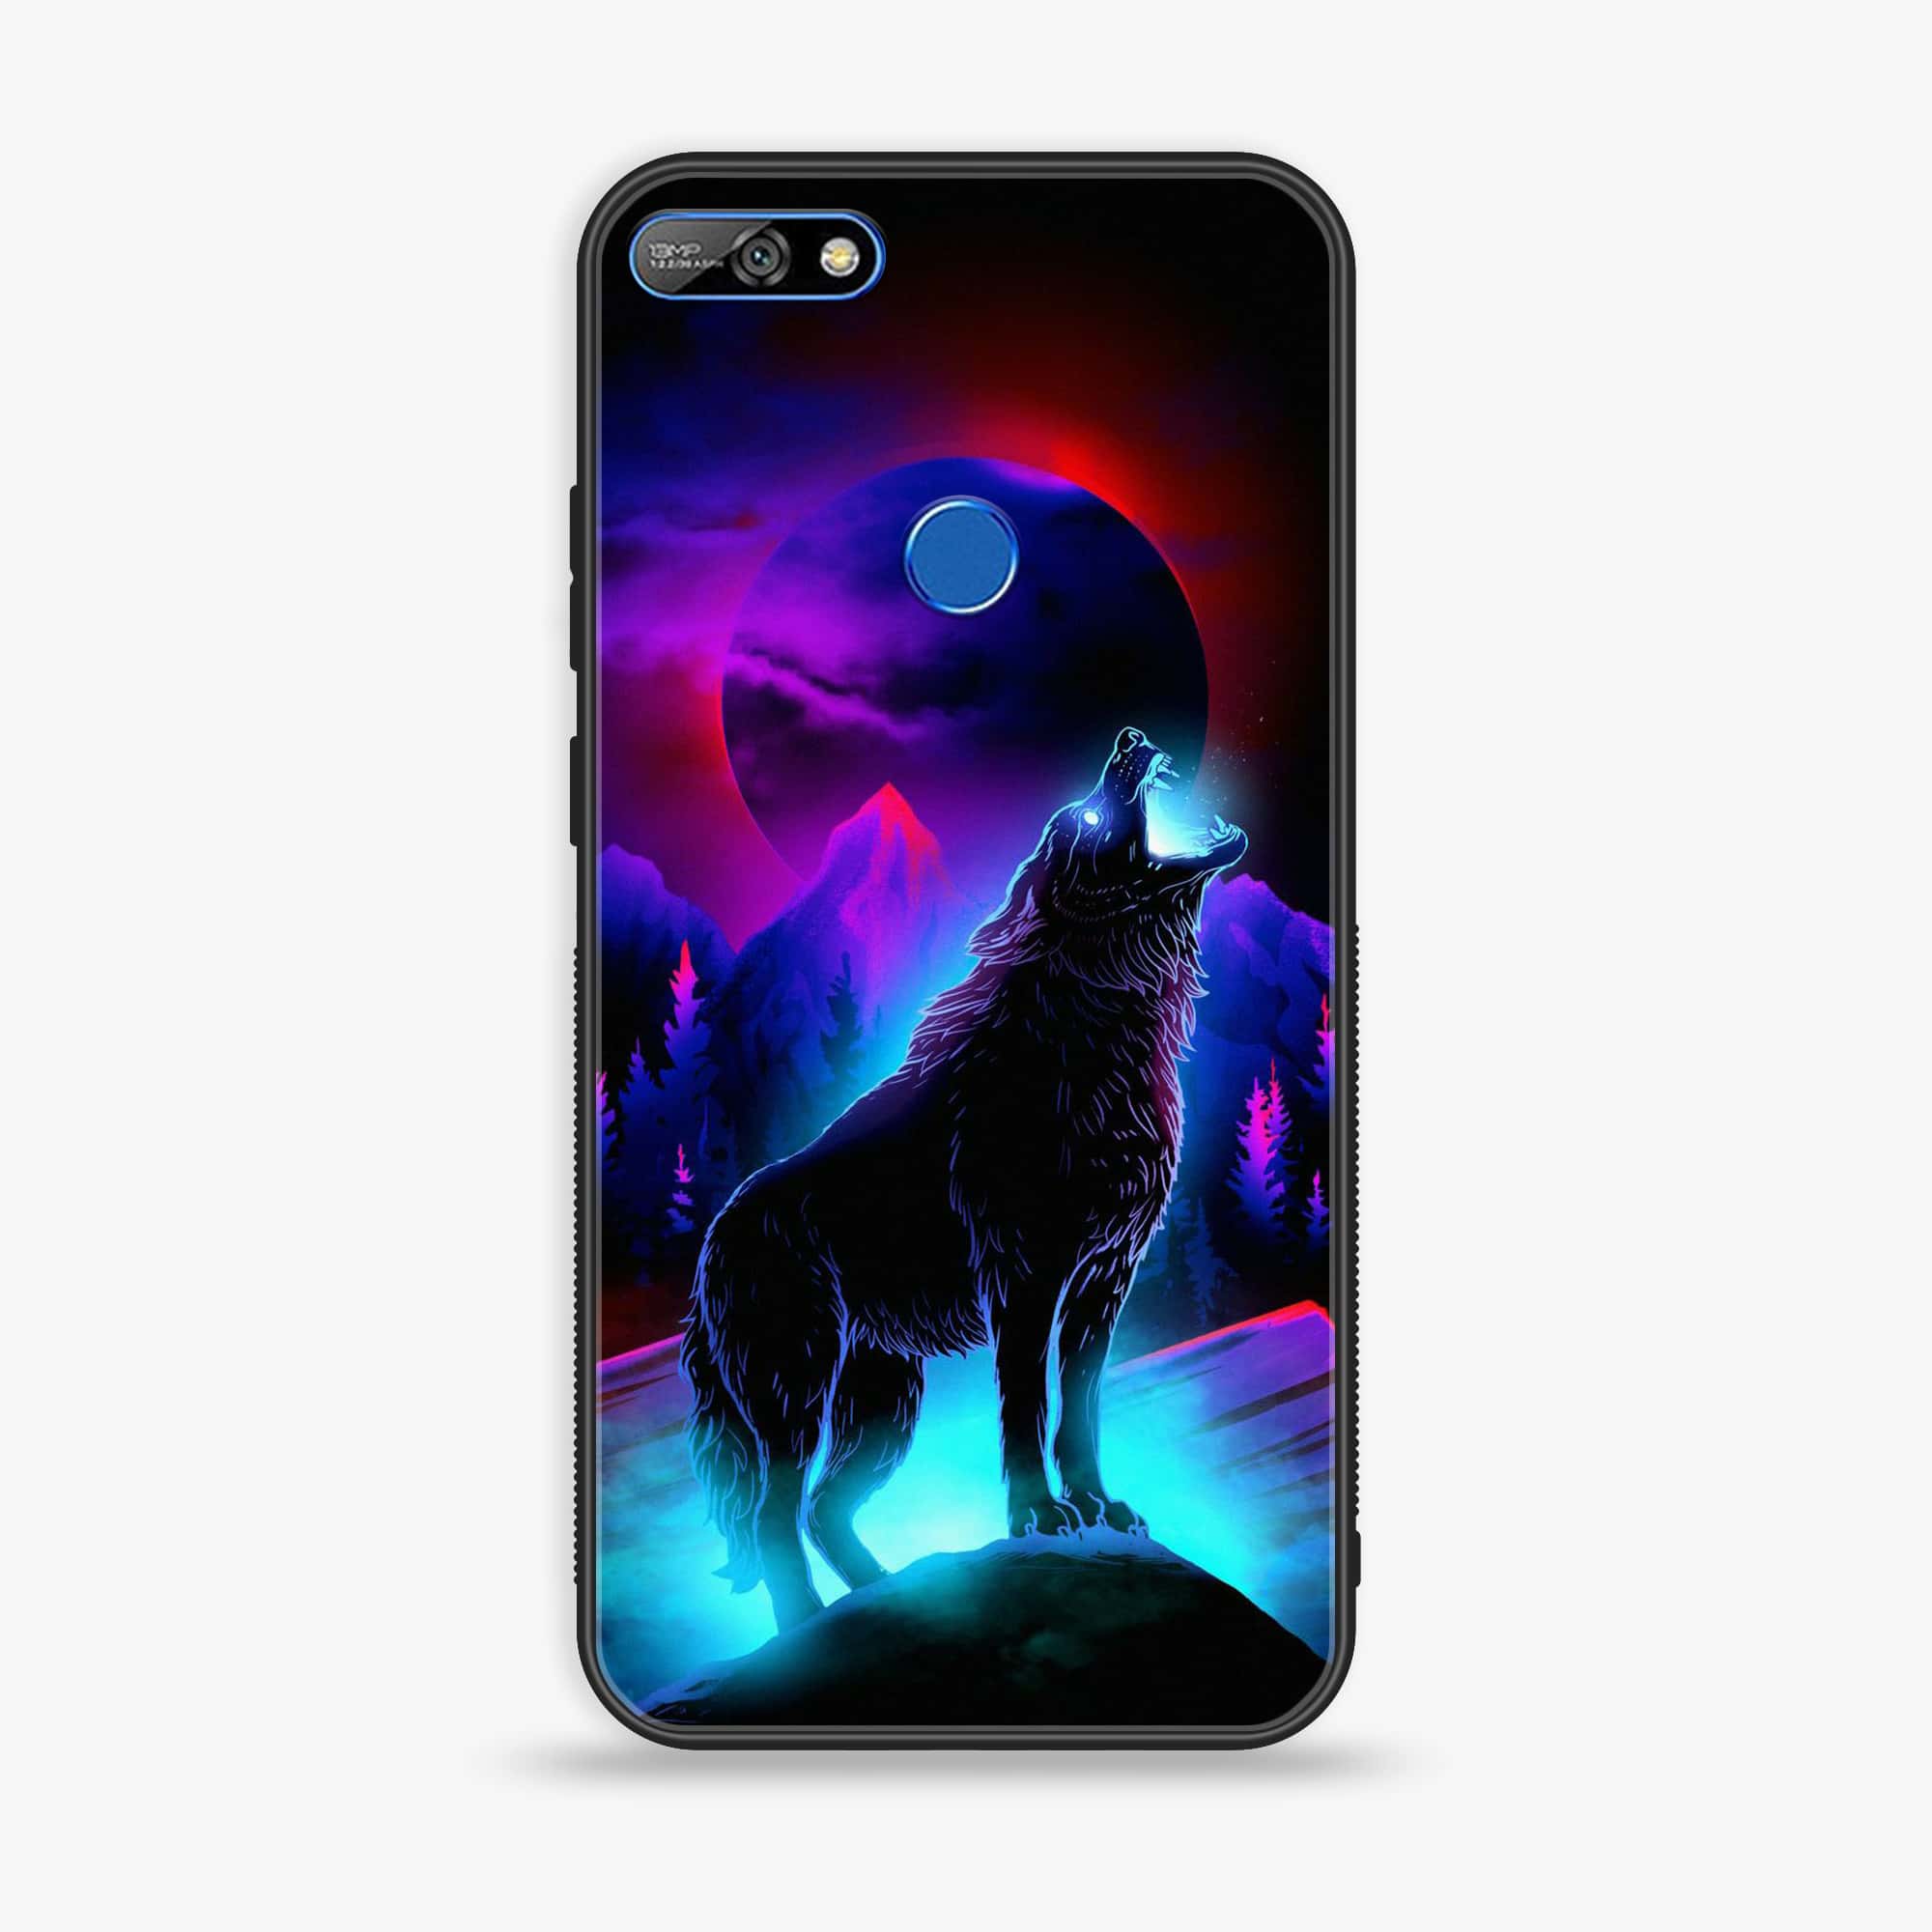 Huawei Y7 Prime (2018) - Wolf Series - Premium Printed Glass soft Bumper shock Proof Case